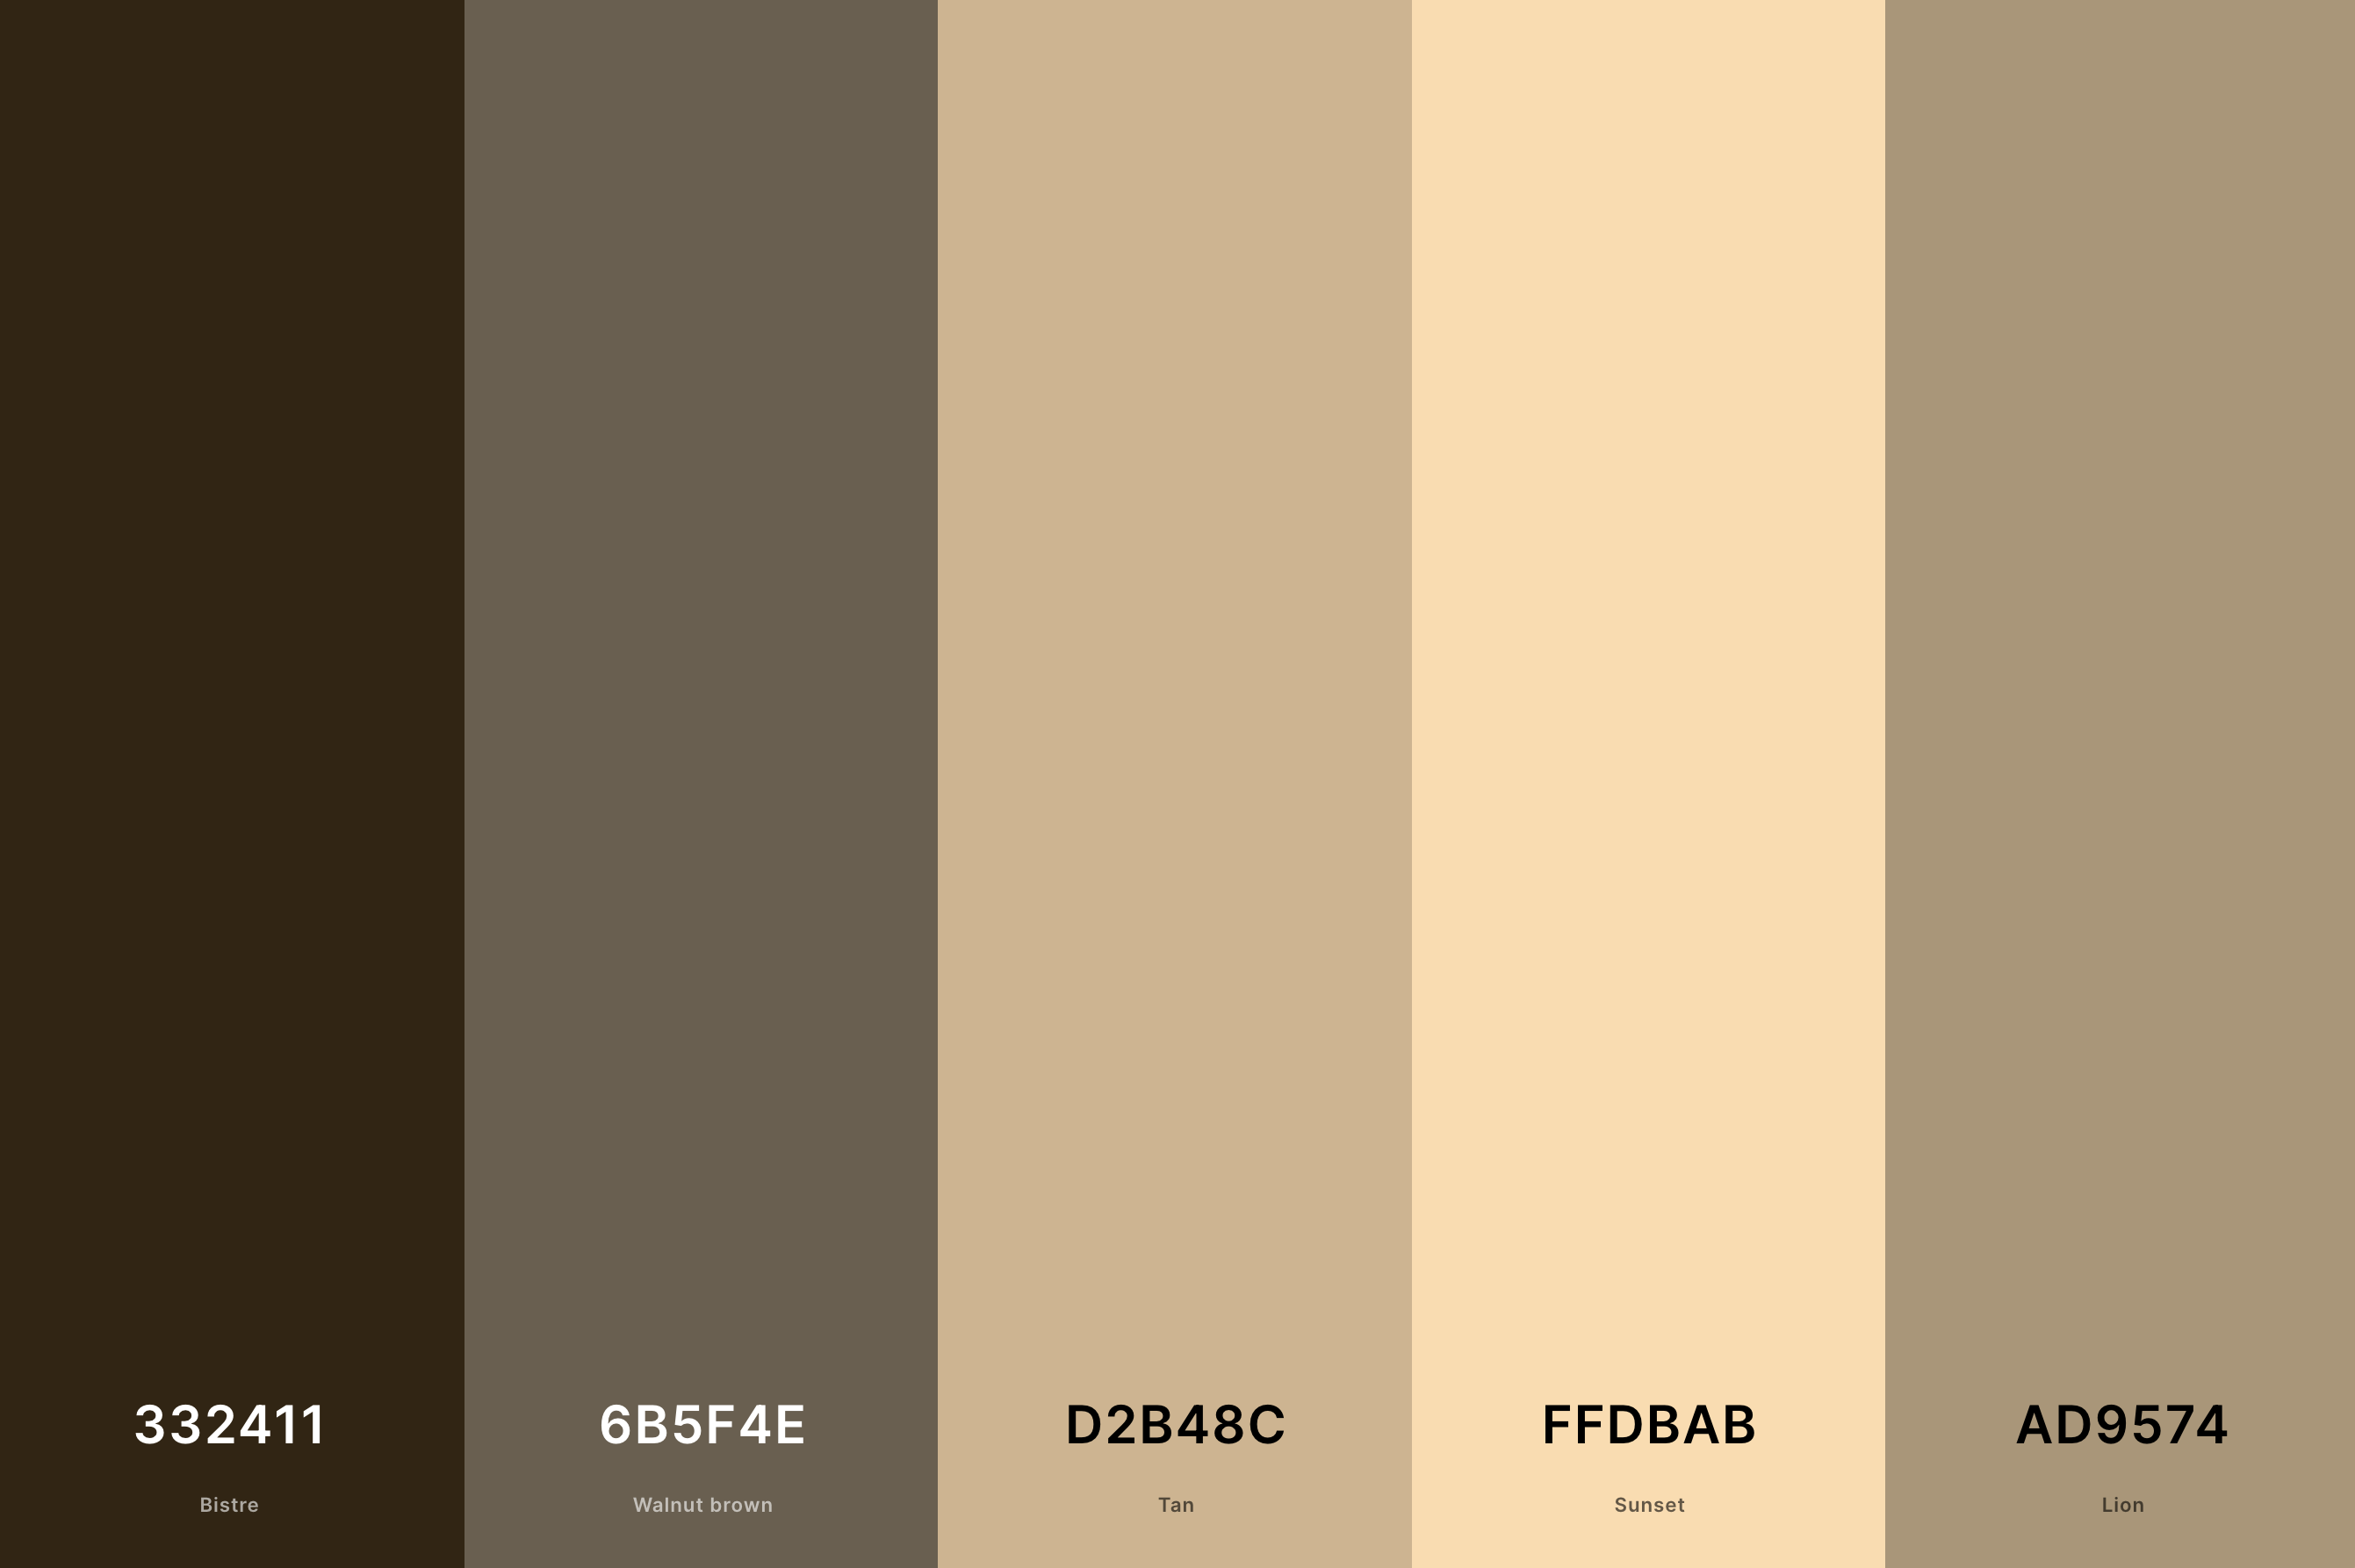 8. Brown And Tan Color Palette Color Palette with Bistre (Hex #332411) + Walnut Brown (Hex #6B5F4E) + Tan (Hex #D2B48C) + Sunset (Hex #FFDBAB) + Lion (Hex #AD9574) Color Palette with Hex Codes